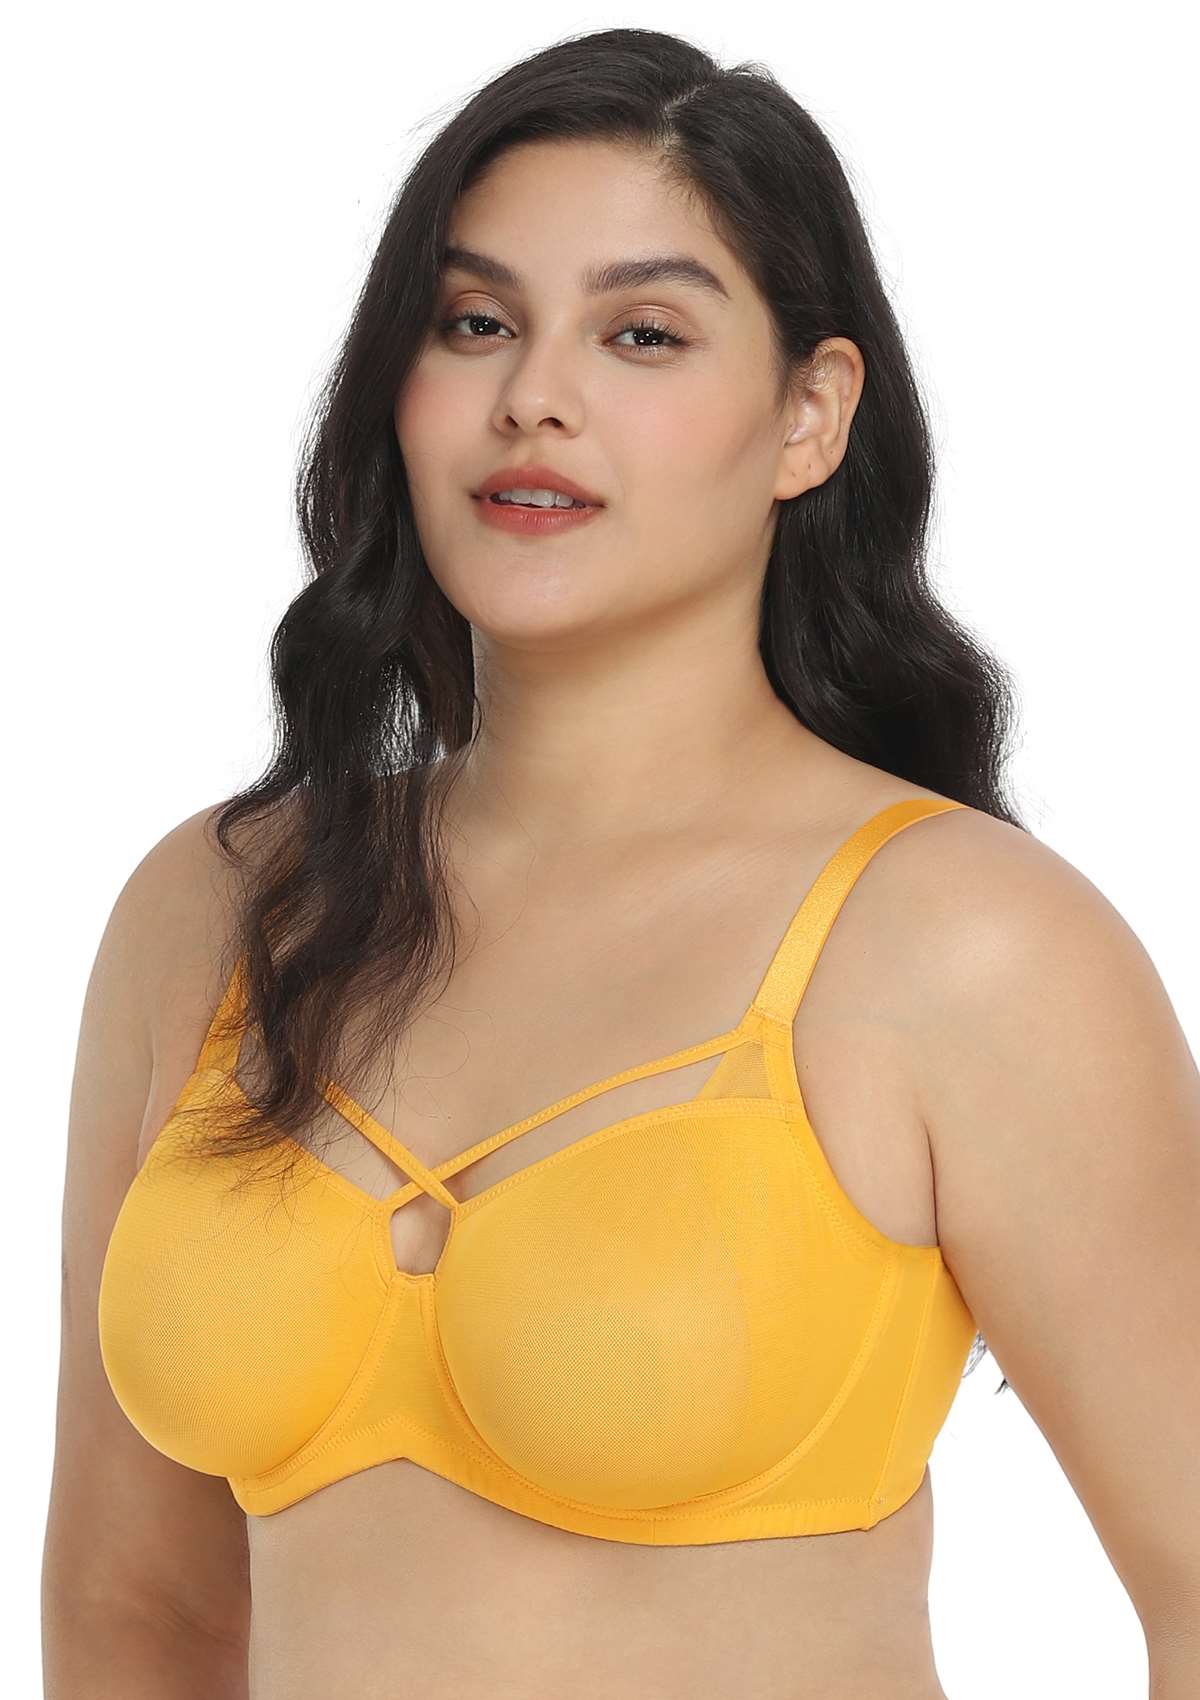 HSIA Billie Cross Front Strap Smooth Sheer Mesh Comfy Underwire Bra - Yellow / 40 / C